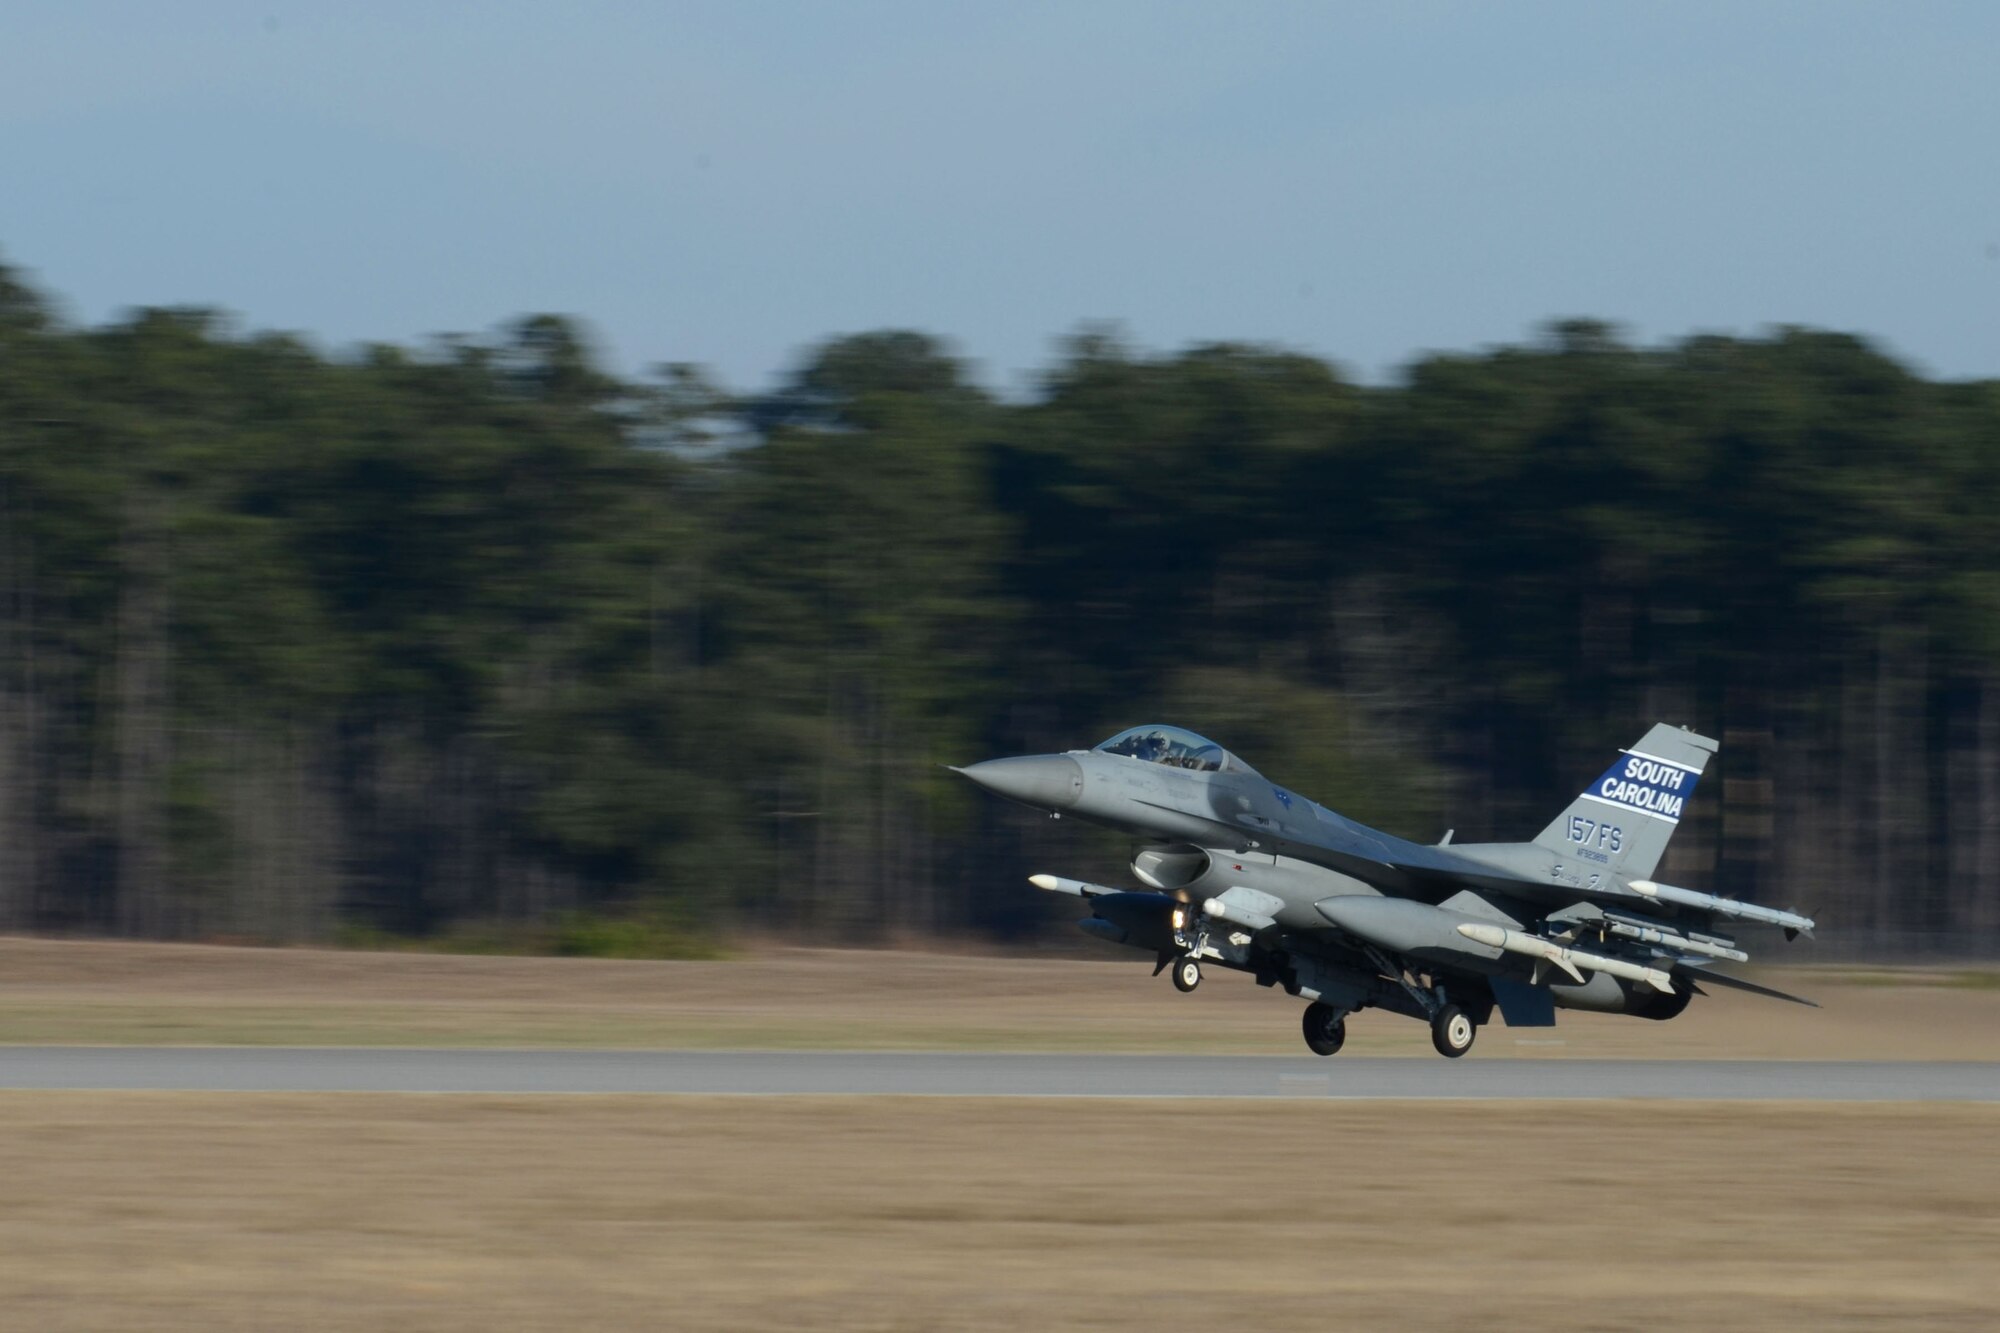 A South Carolina Air National Guard F-16 Fighting Falcon lands at McEntire Joint National Guard Base, after a training mission during surge flying operations Feb. 7, 2015. The surge encompasses high tempo flying as part of vital training in preparations for deployments. (U.S. Air National Guard photo by Amn Megan Floyd/Released)